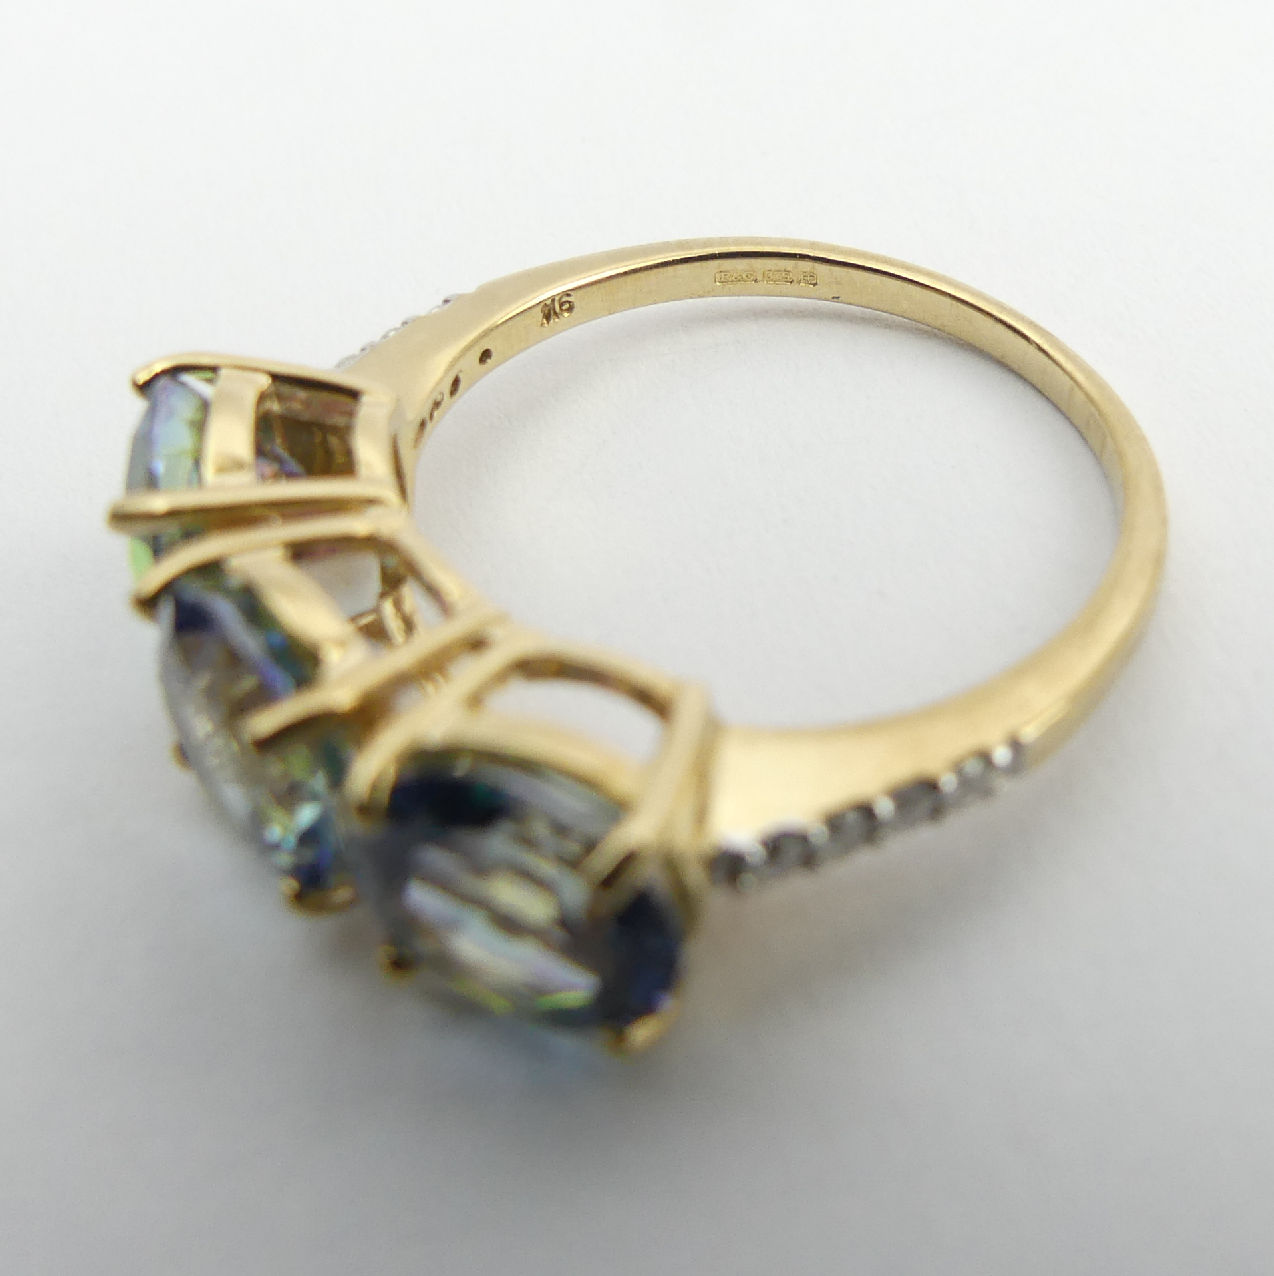 9ct gold mystic topaz and diamond ring, 3.2 grams, 7mm, size N. UK Postage £12. - Image 6 of 7